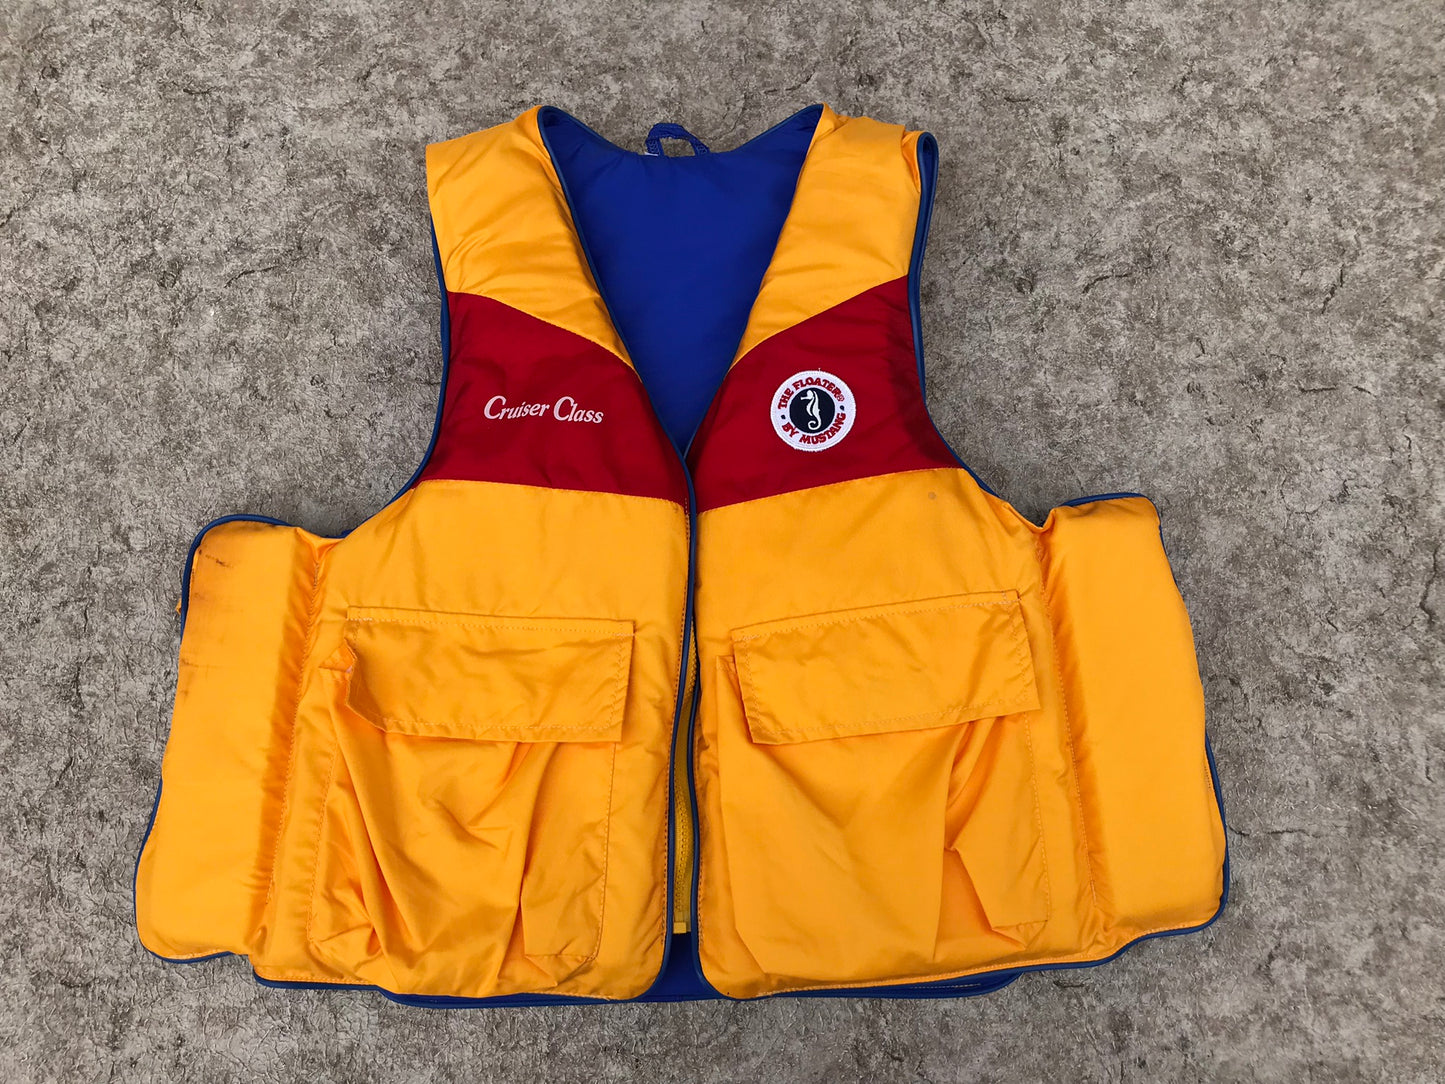 Life Jacket Adult Size X Large Mustang Cruiser Class Yellow Blue Red